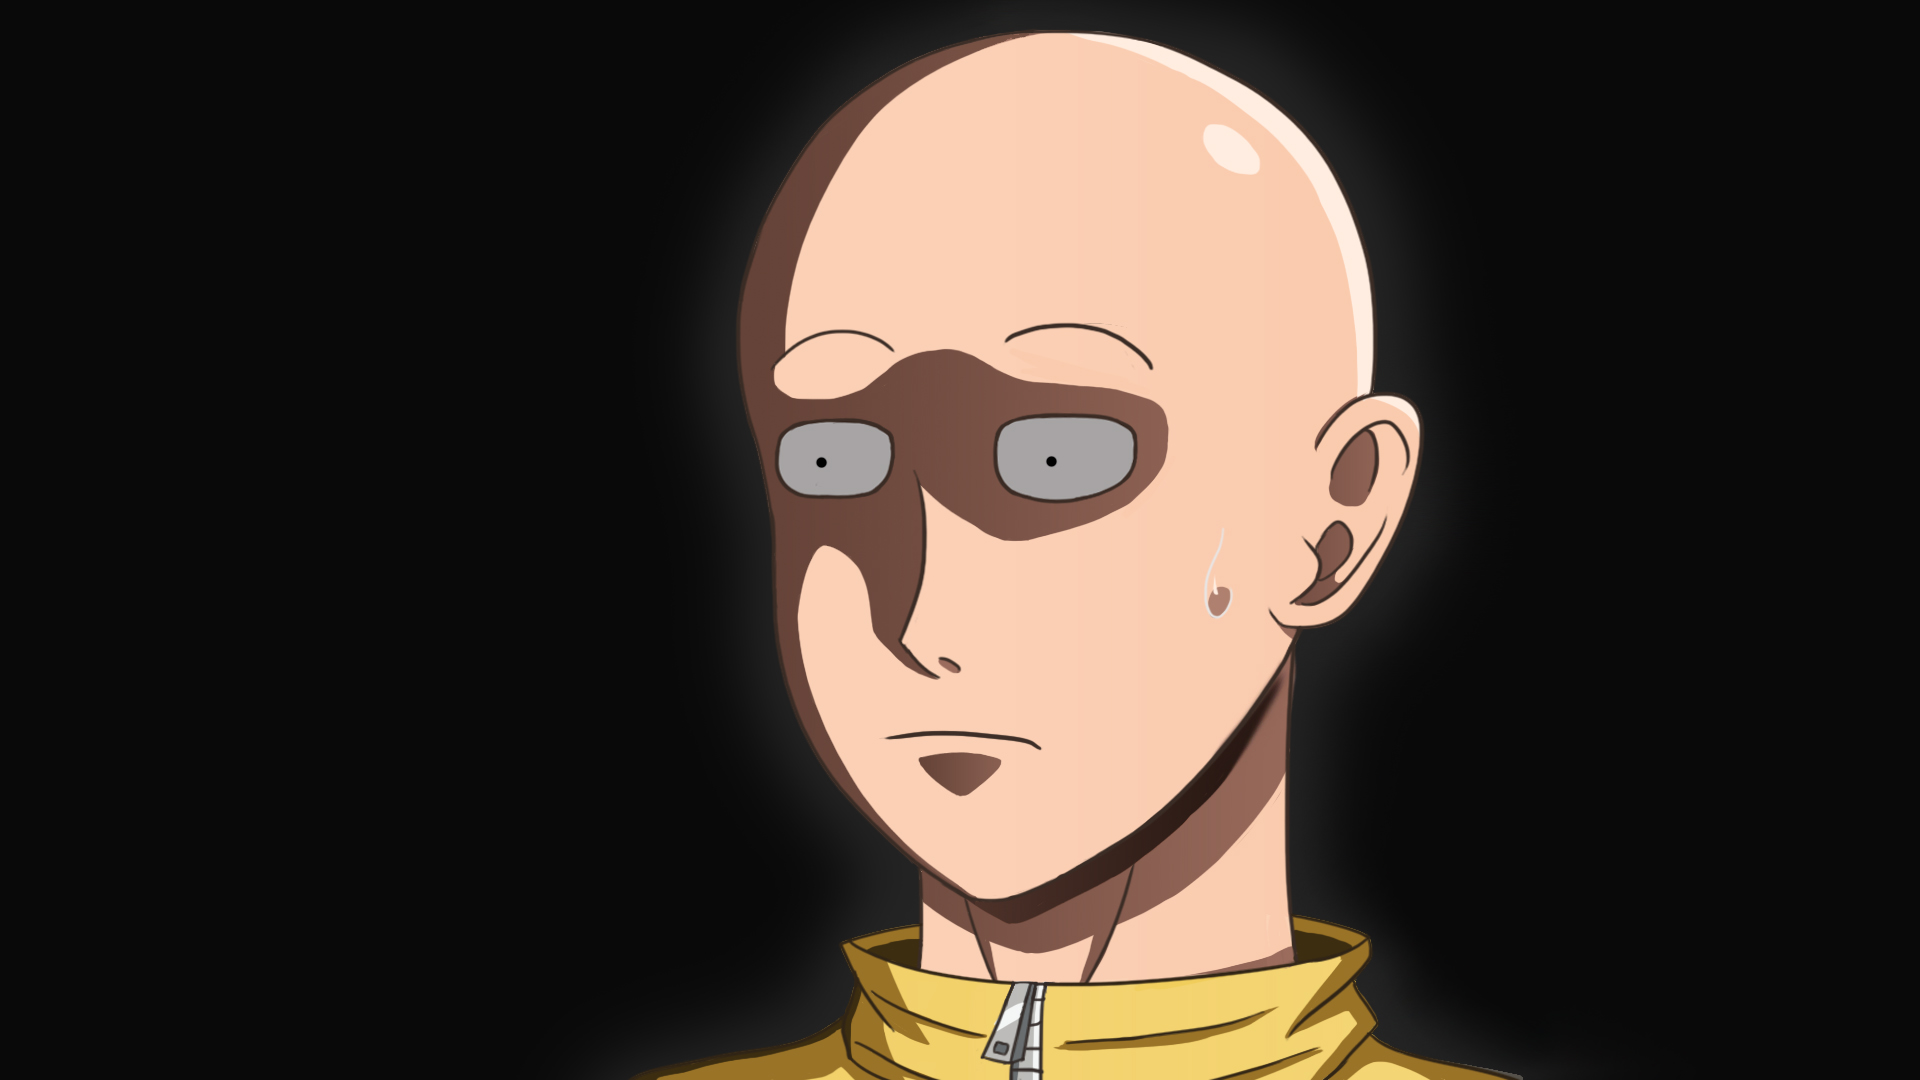 One Punch man